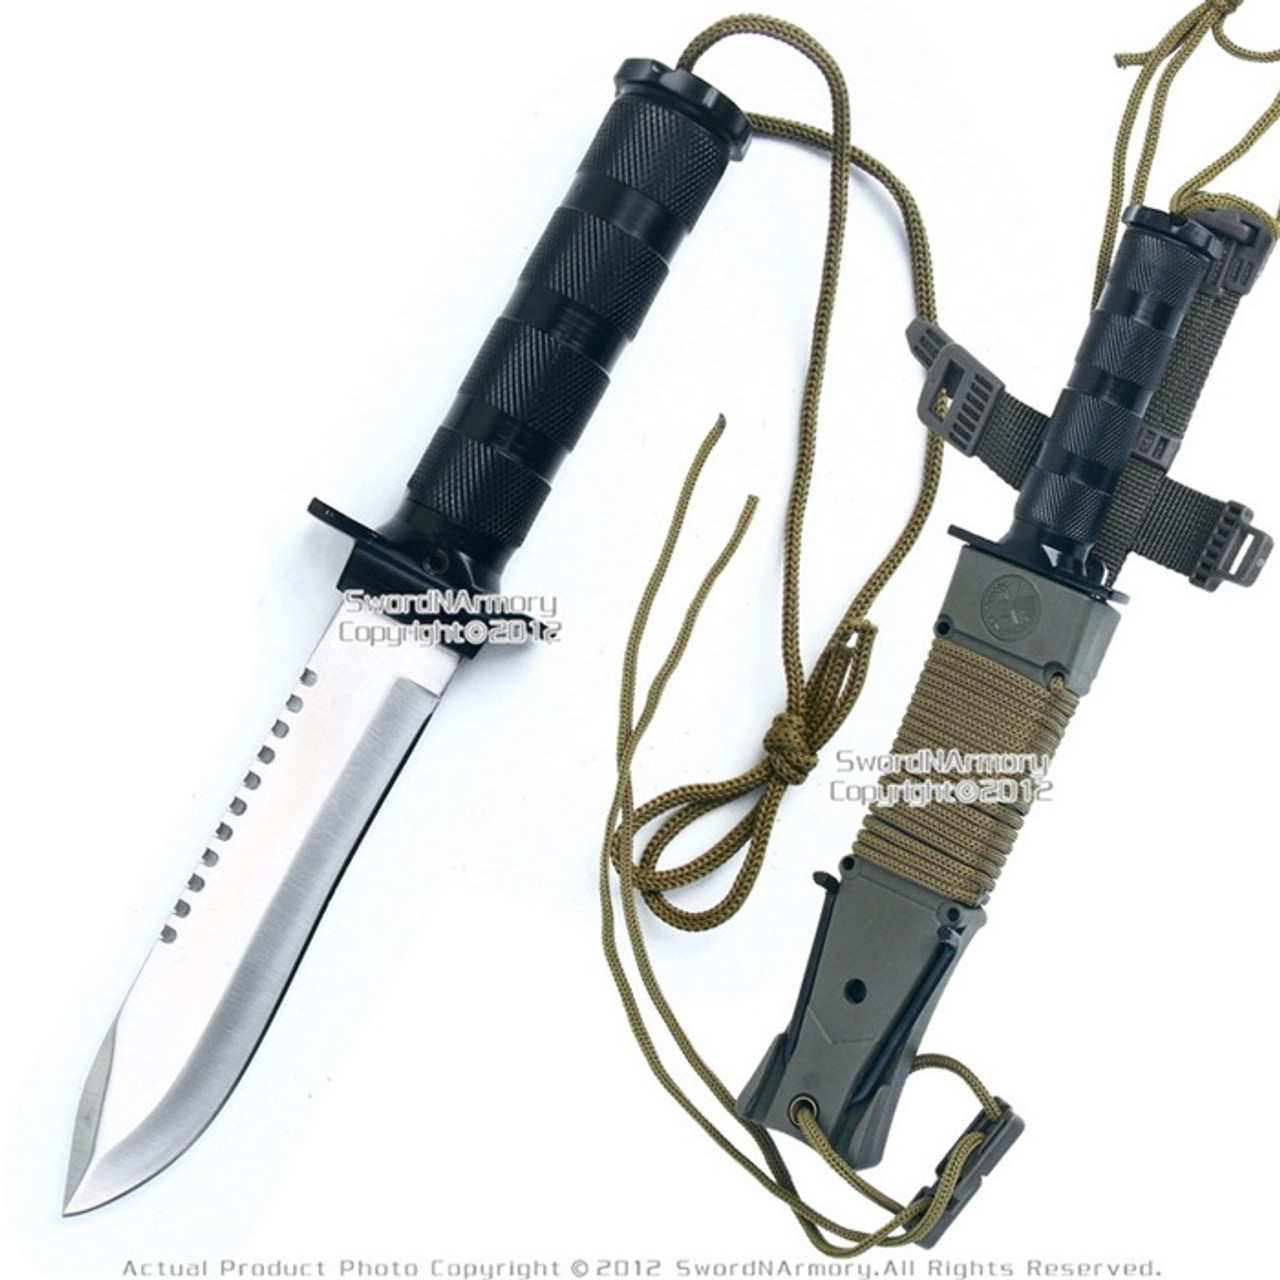 12 Hunting Bayonet Tactical Folding Knife Survival Army Knife 440 Blade  With Leather Knife Cover